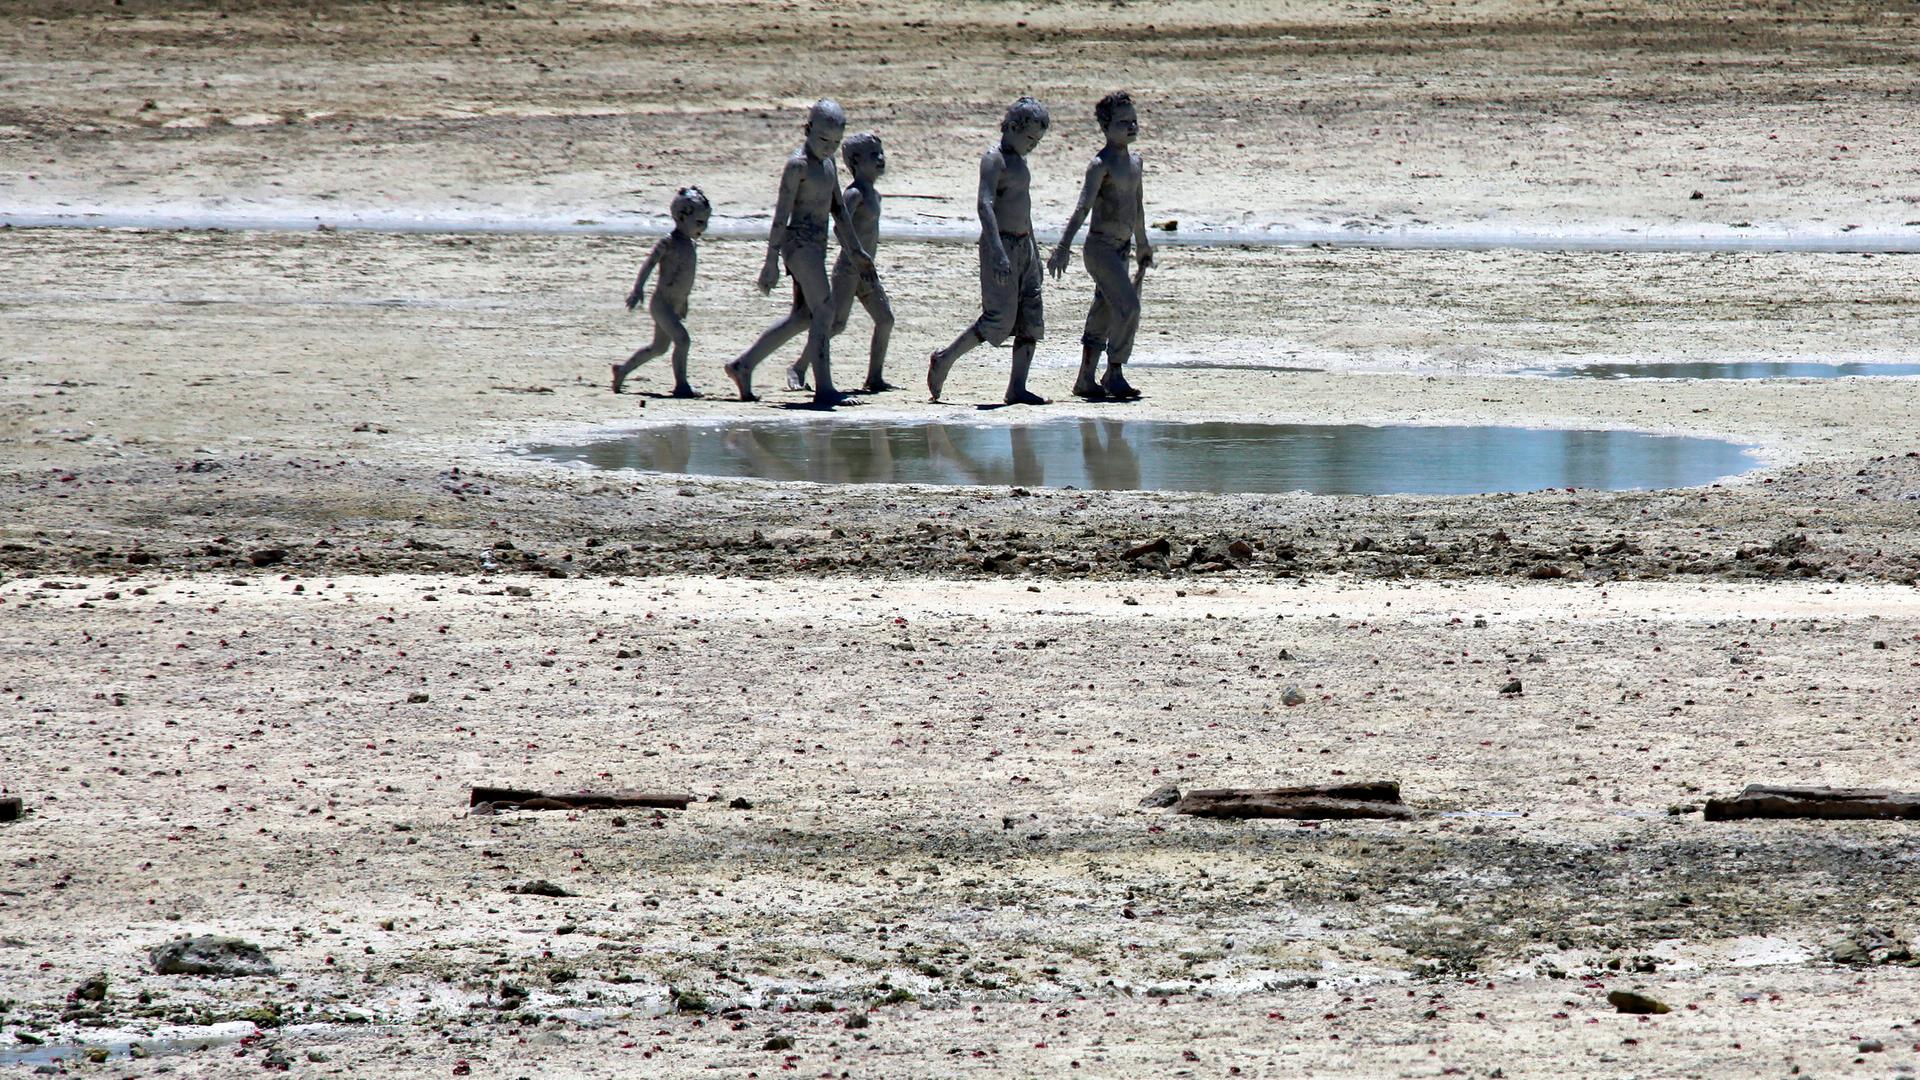 Four young people walk on an island with puddles